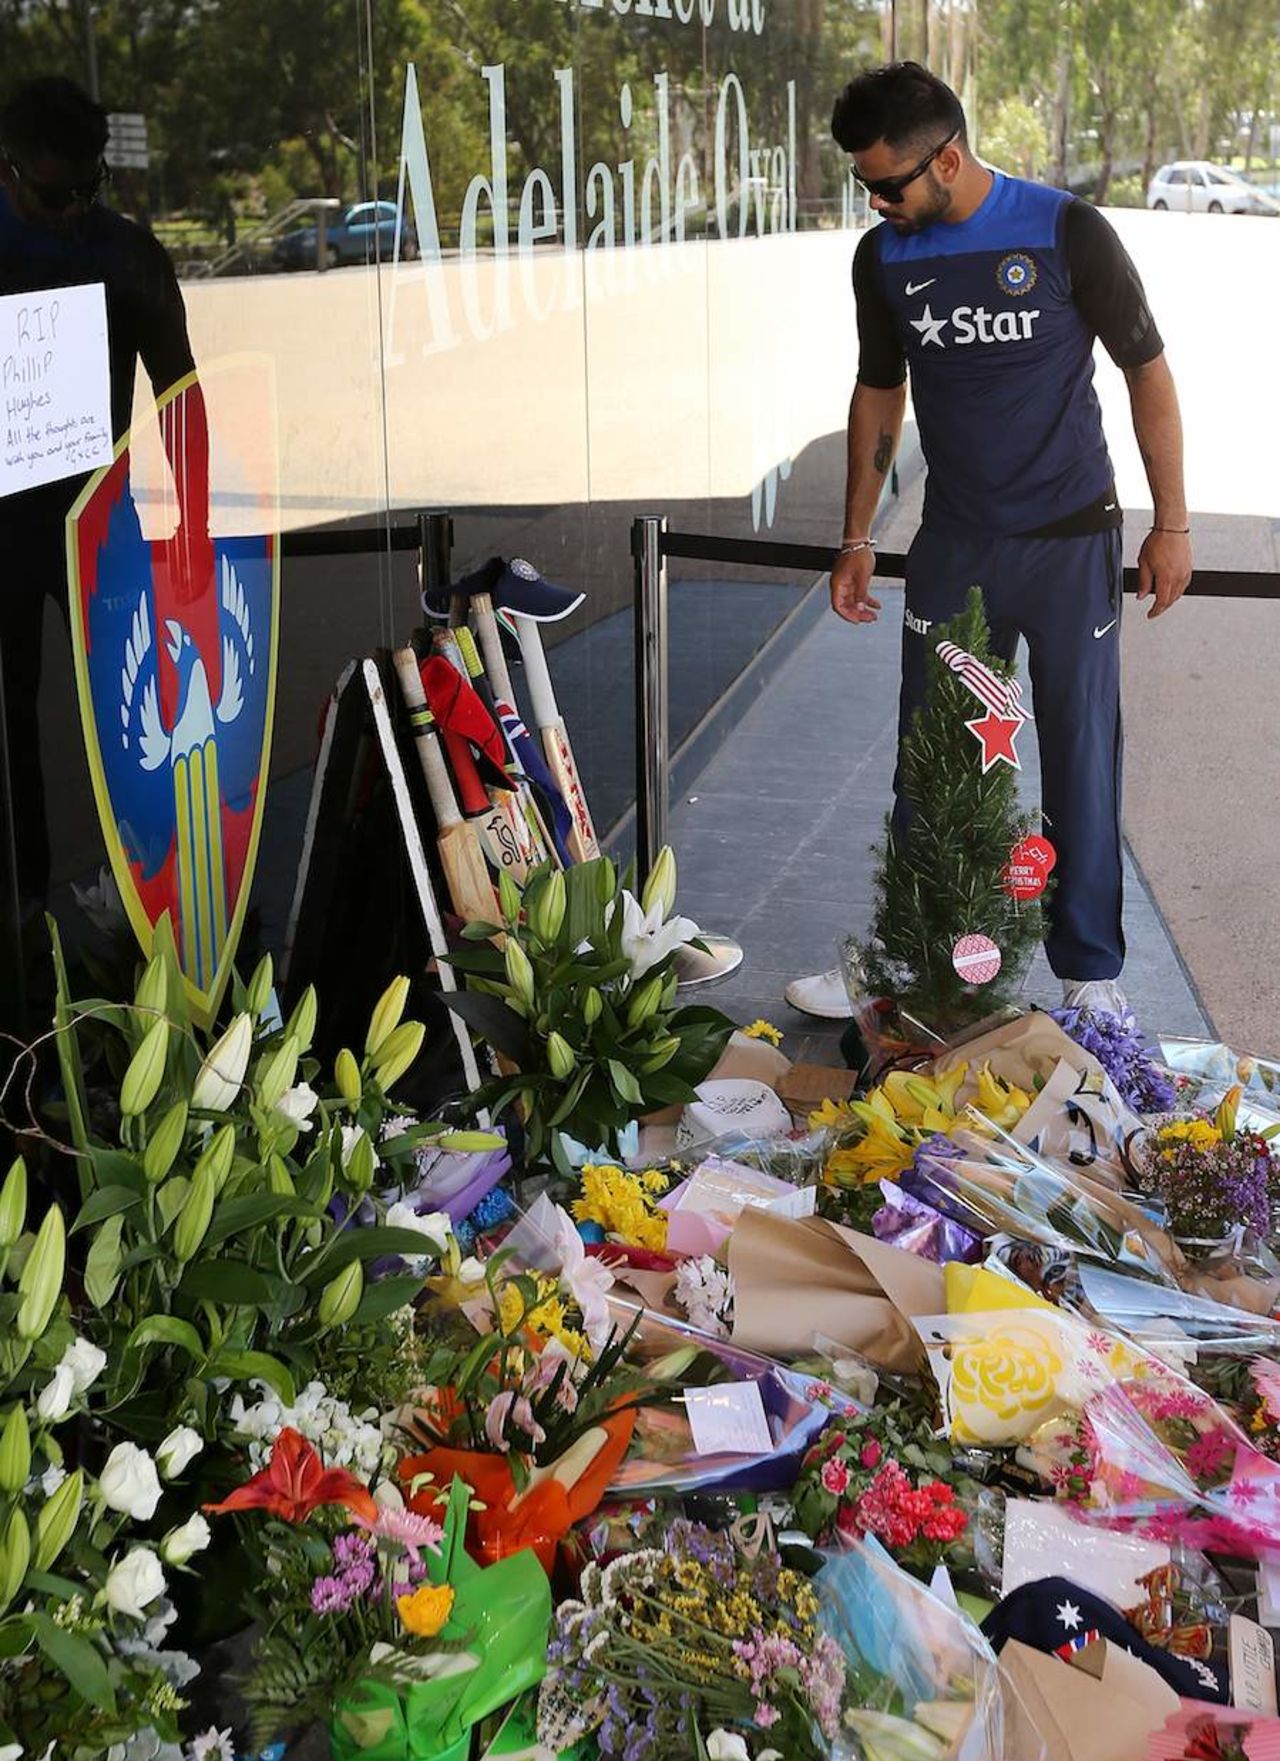 Virat Kohli puts out his bat at a tribute to Phillip Hughes at the Adelaide Oval, Adelaide, November 29, 2014